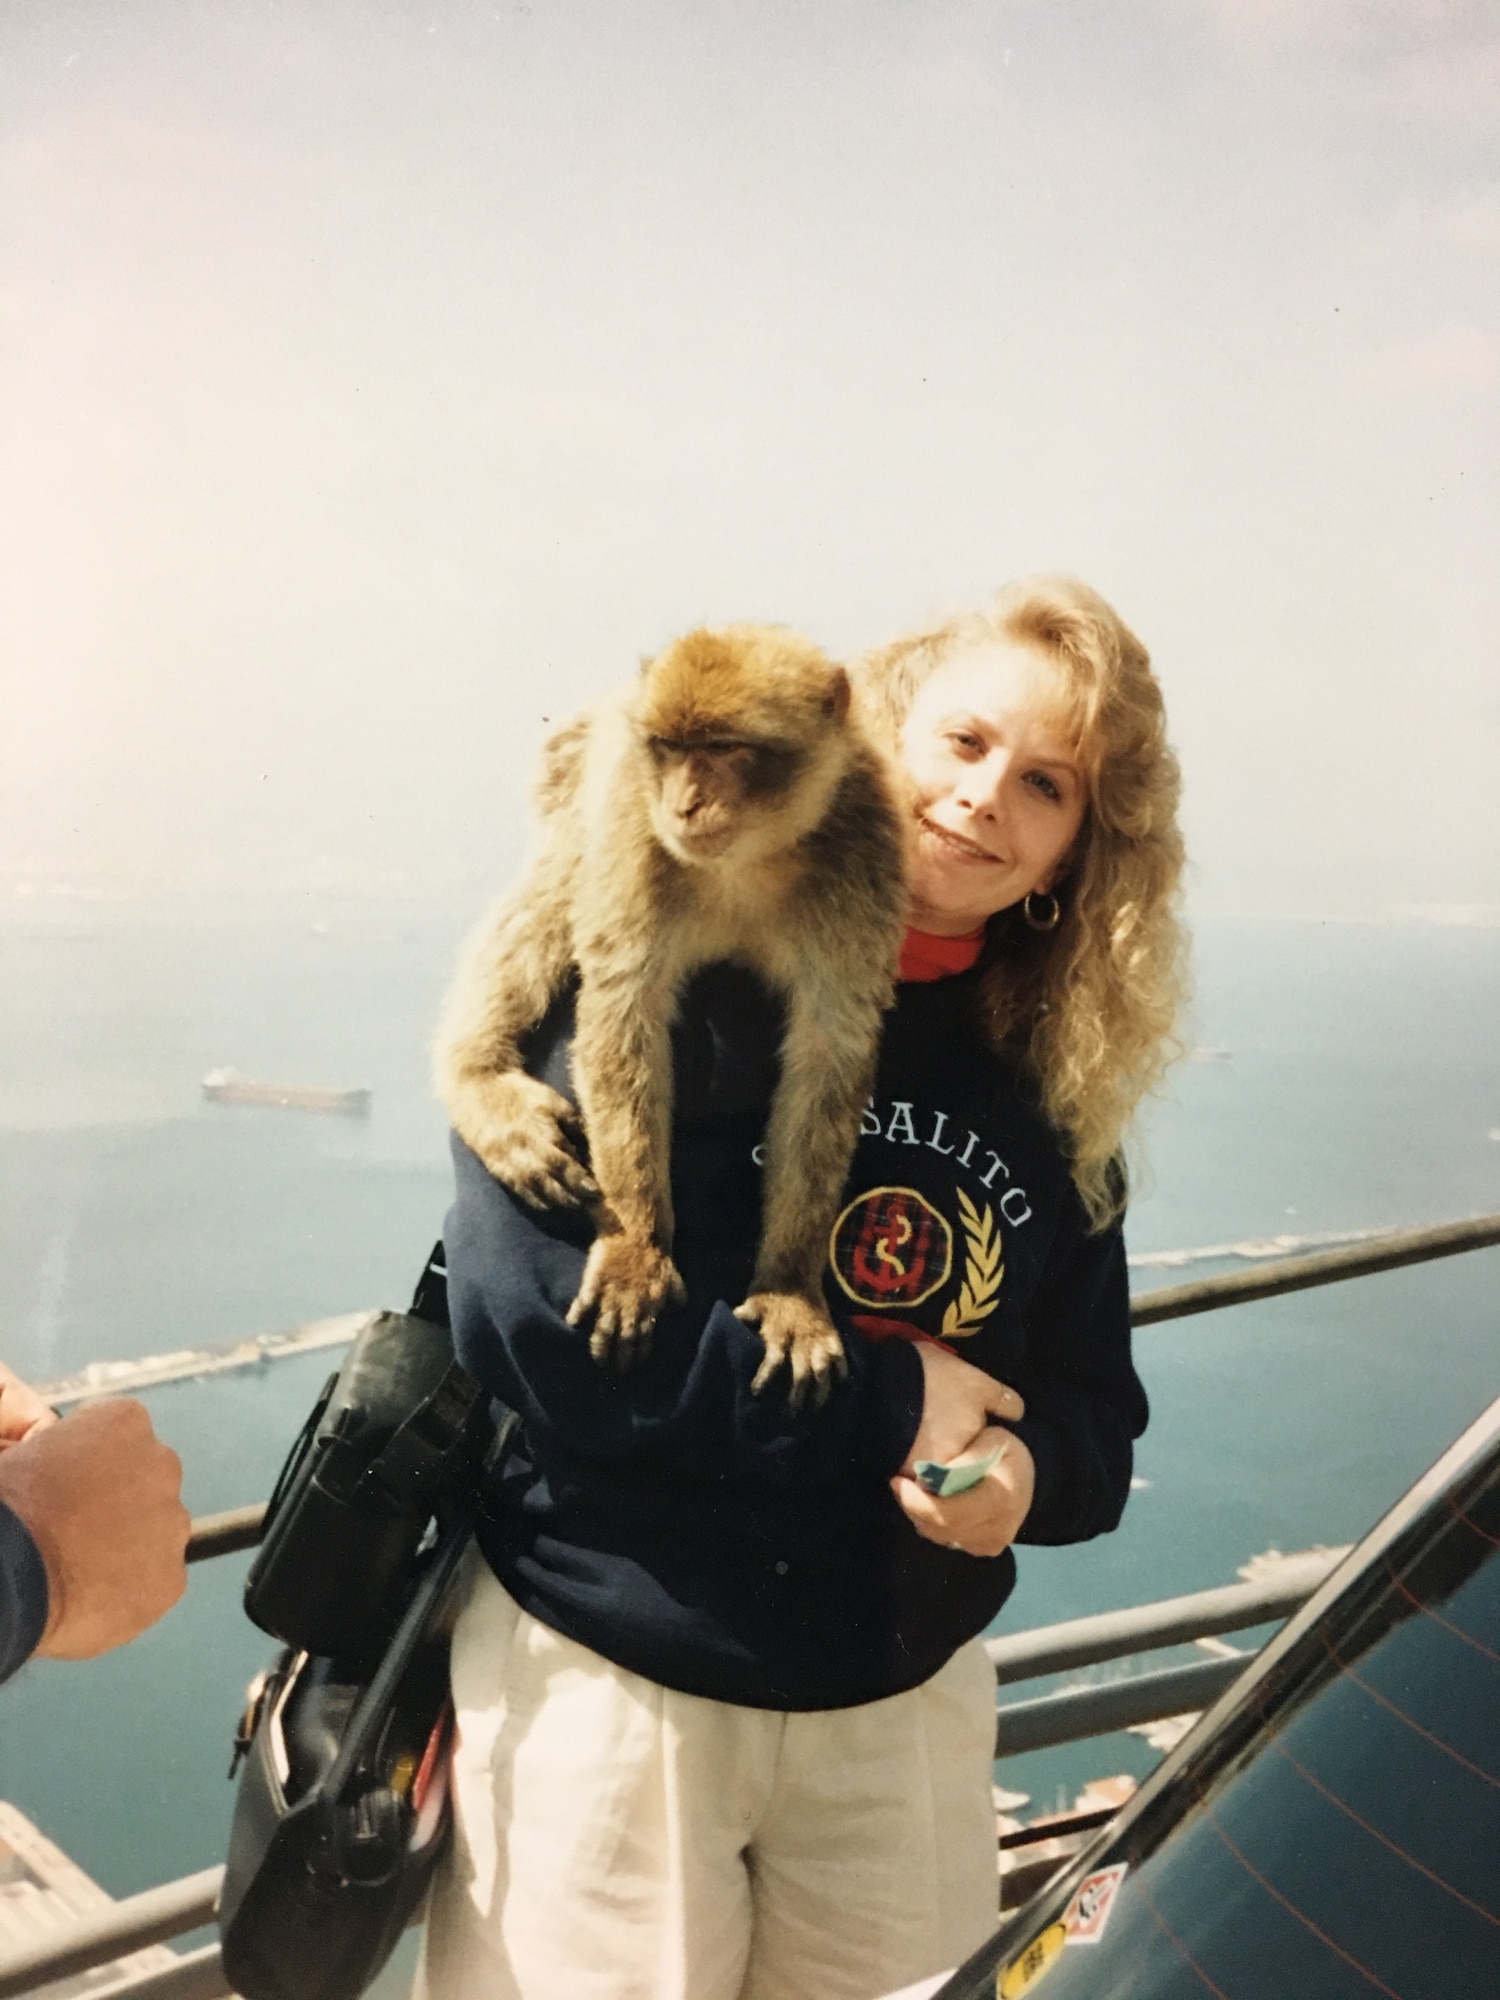 Tammy Jetton during a temporary duty assignment to Rota, Spain that allowed for a side trip to Gibraltar.